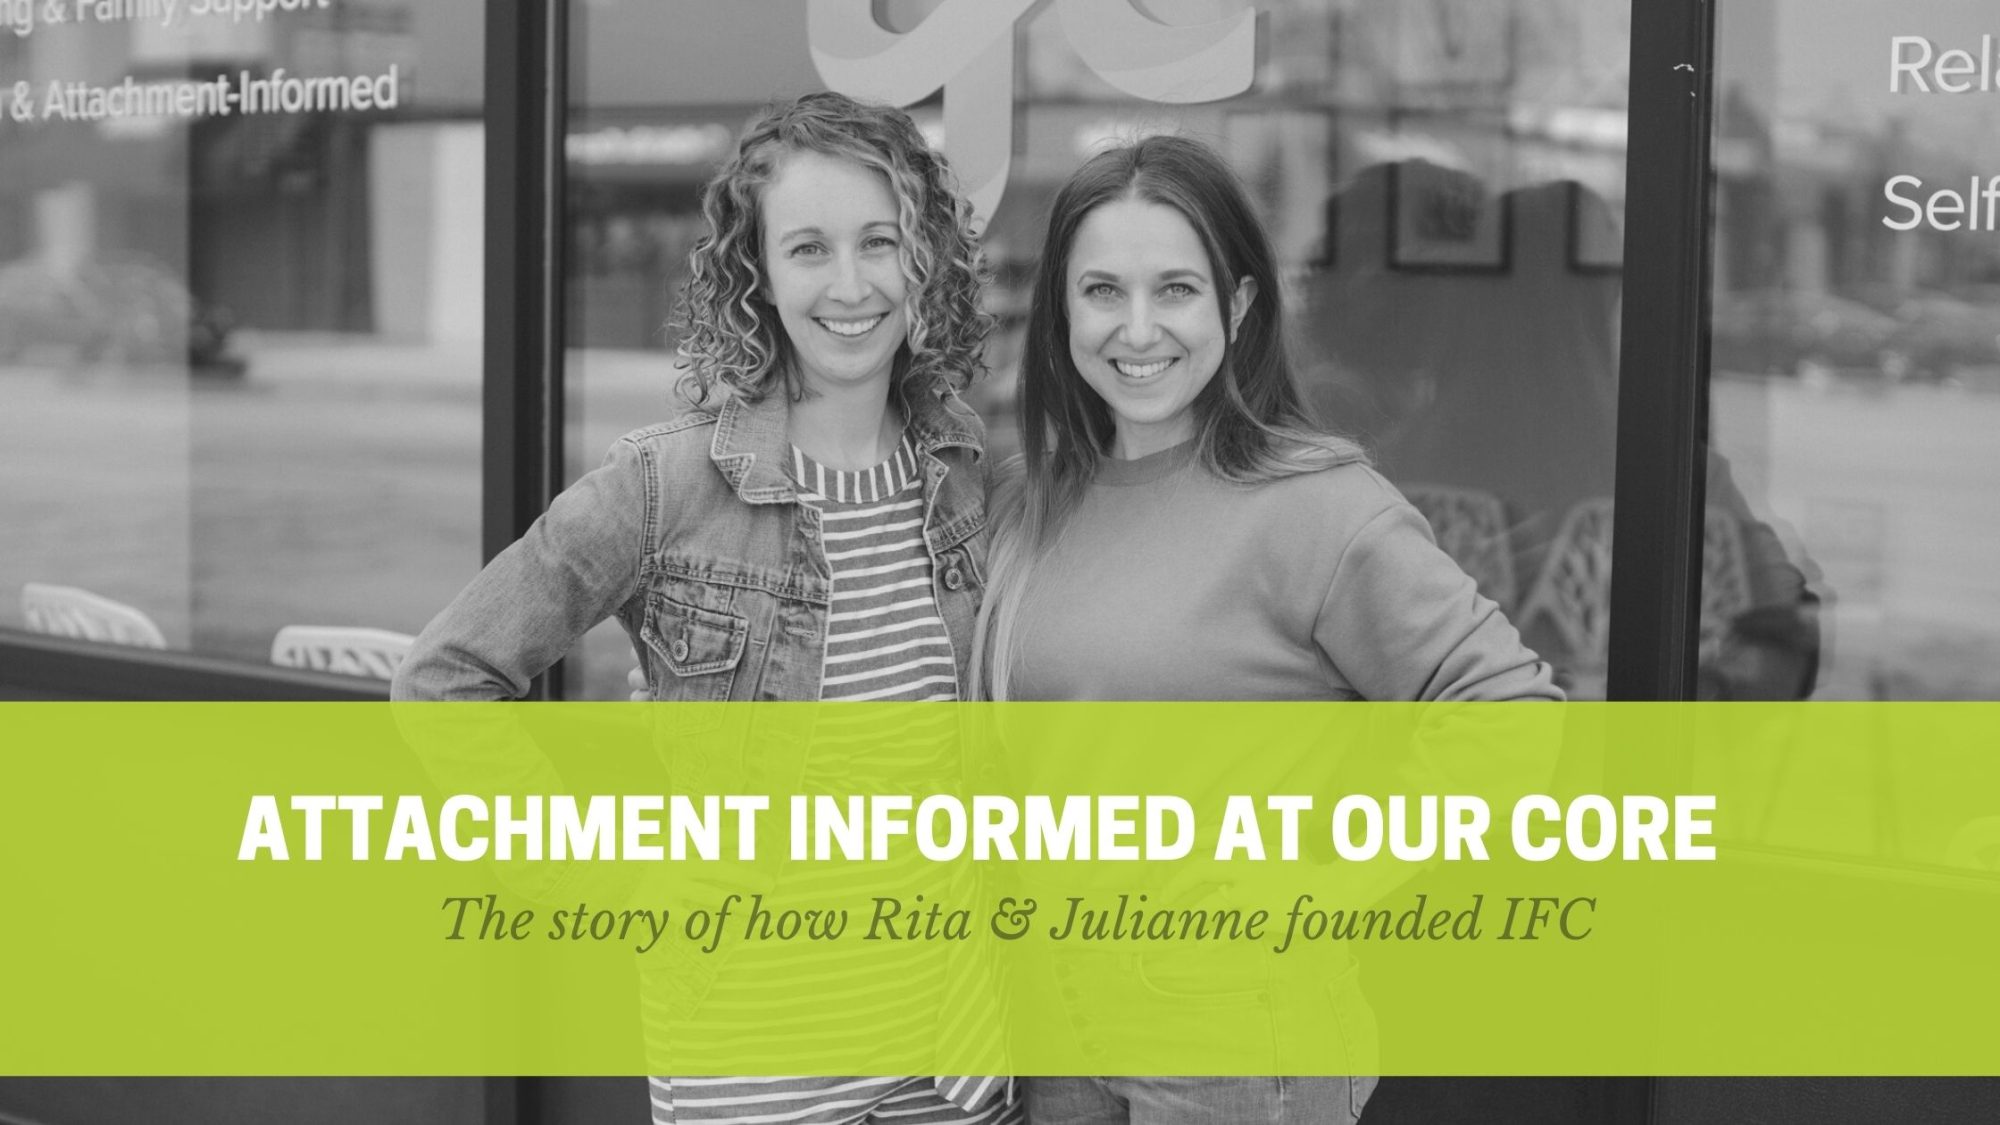 Black & white picture of Julianne & Rita in front of IFC in River Forest, green banner across image includes title "attachment informed at our core" and a sub title, "the story of how rita and julianne founded IFC"